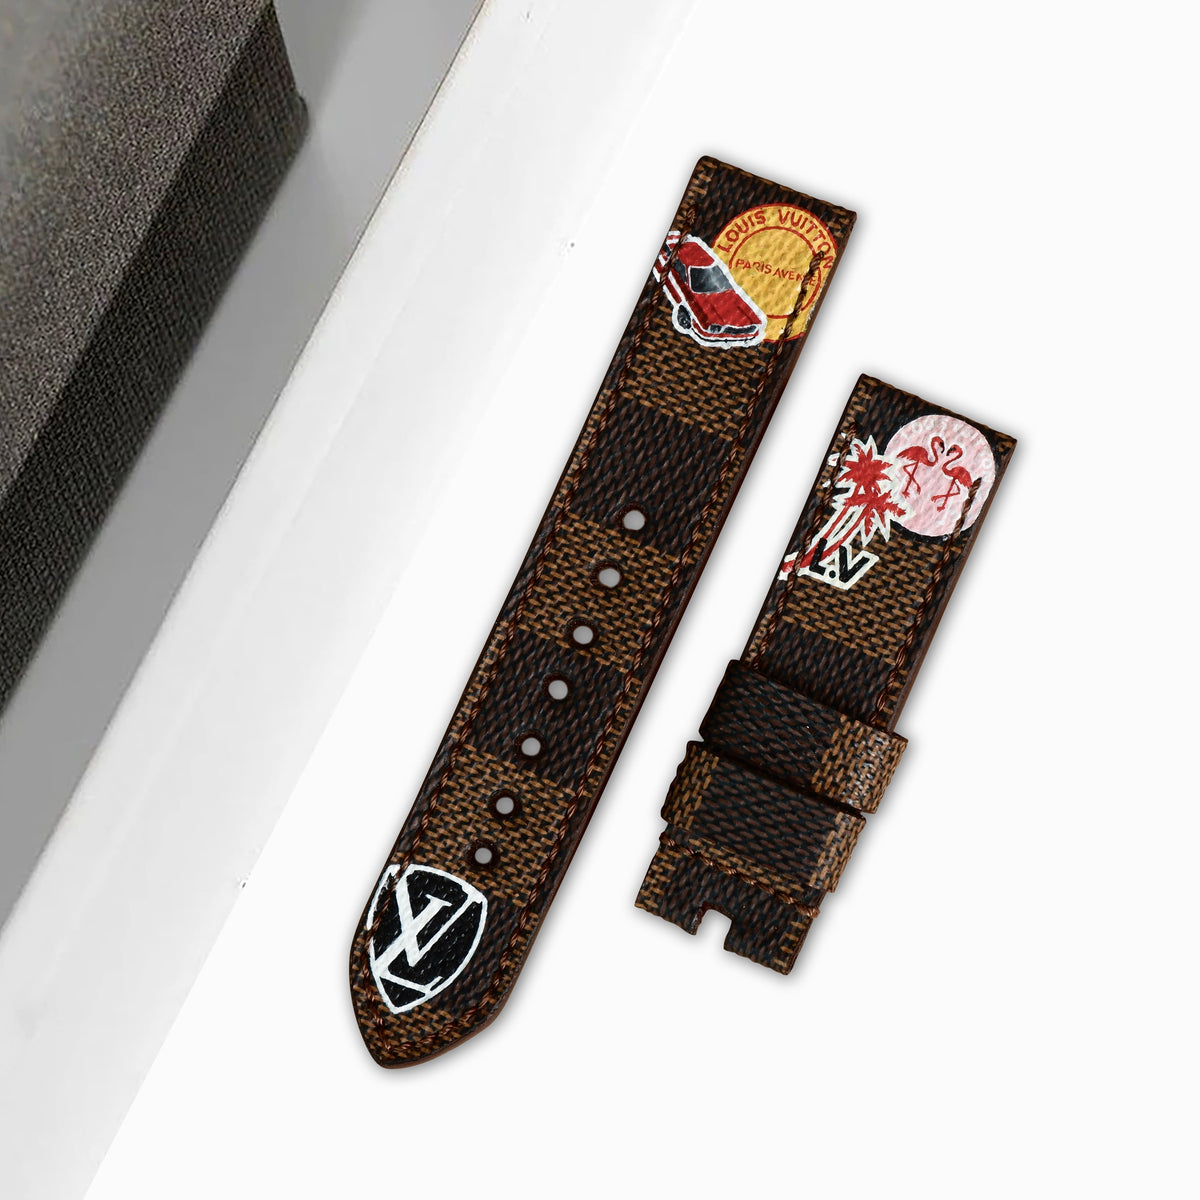 watch bands 40mm lv